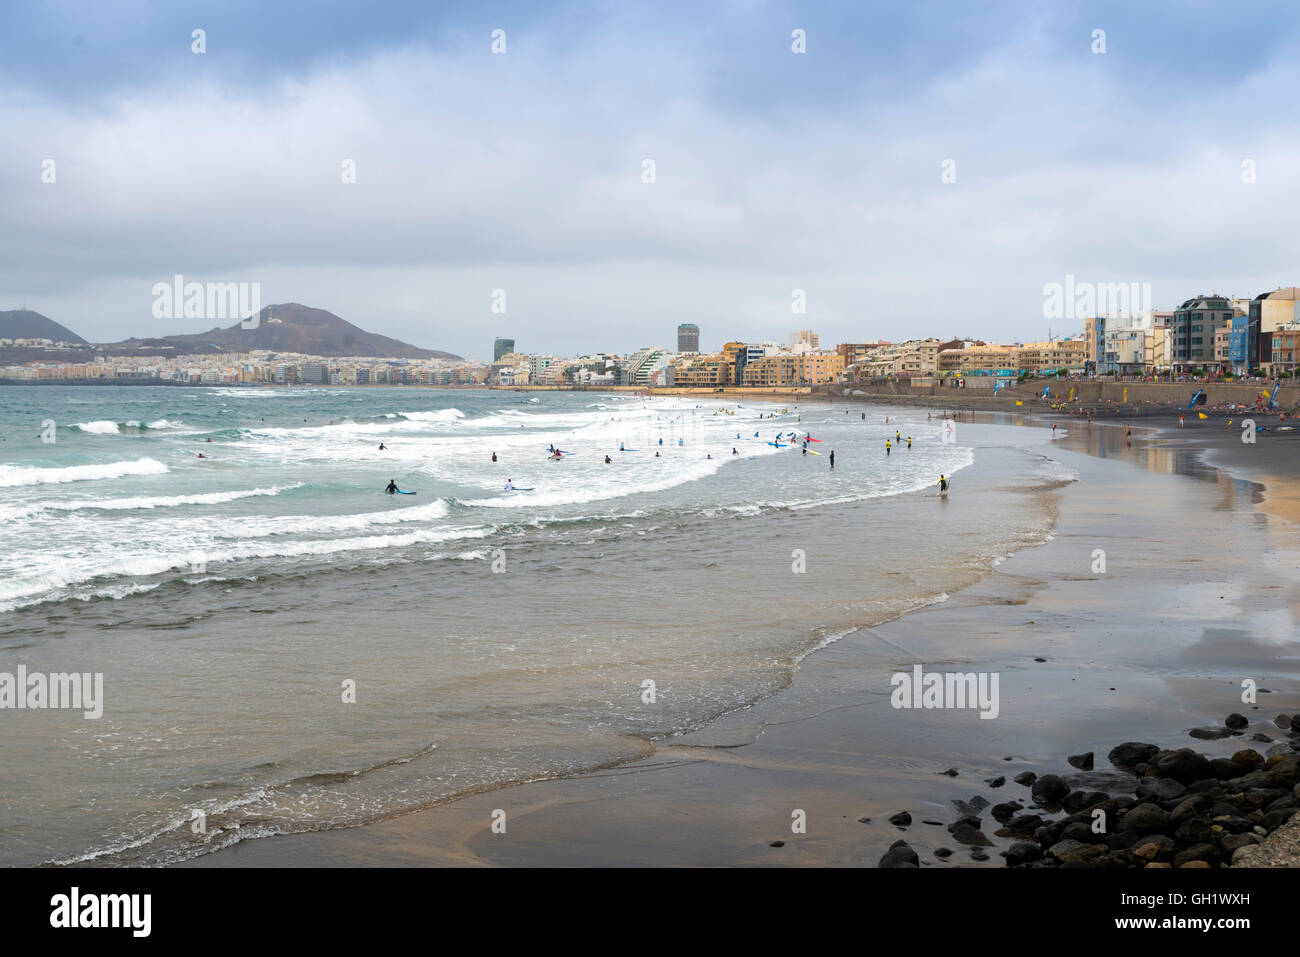 LAS PALMAS DE GRAN CANARIA, SPAIN - AUGUST 3, 2016: swimmers and surfers on the beach Las Canteras in Las Palmas, Canary Islands Stock Photo